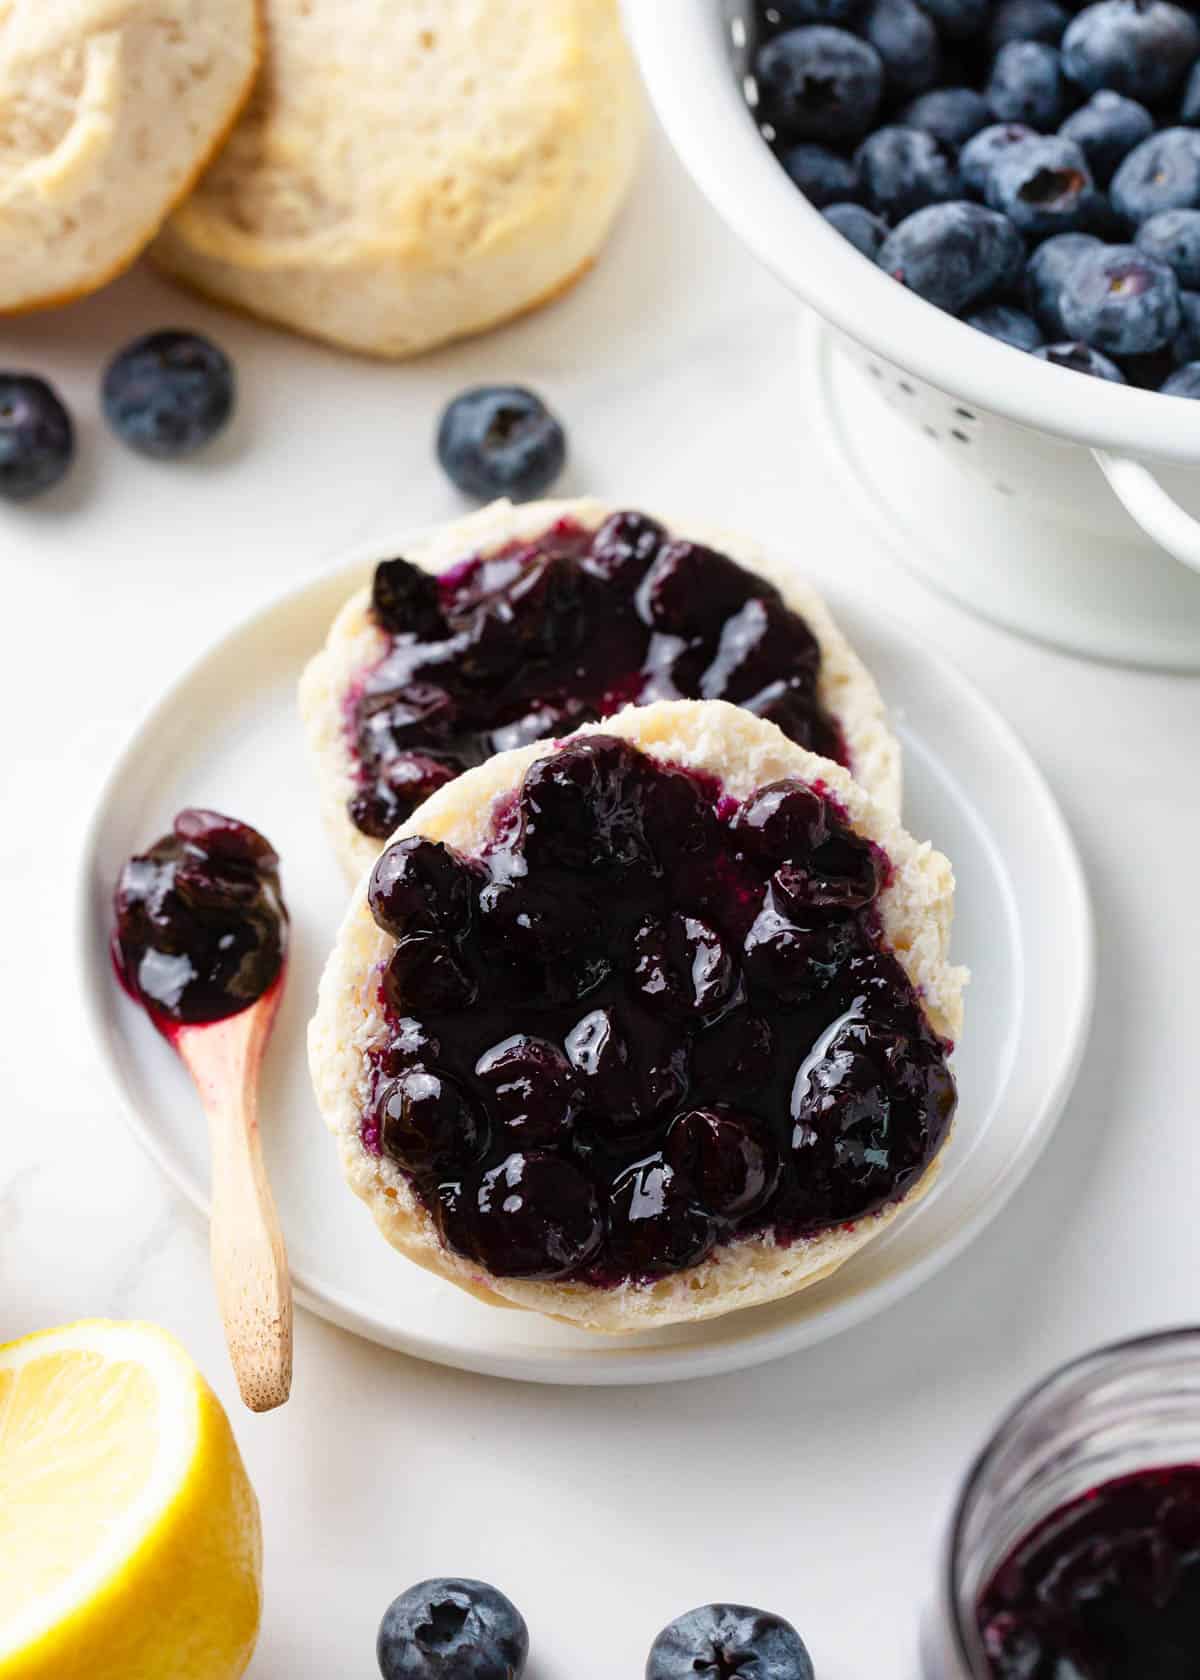 Blueberry jam spread on a biscuit split in half on a plate.